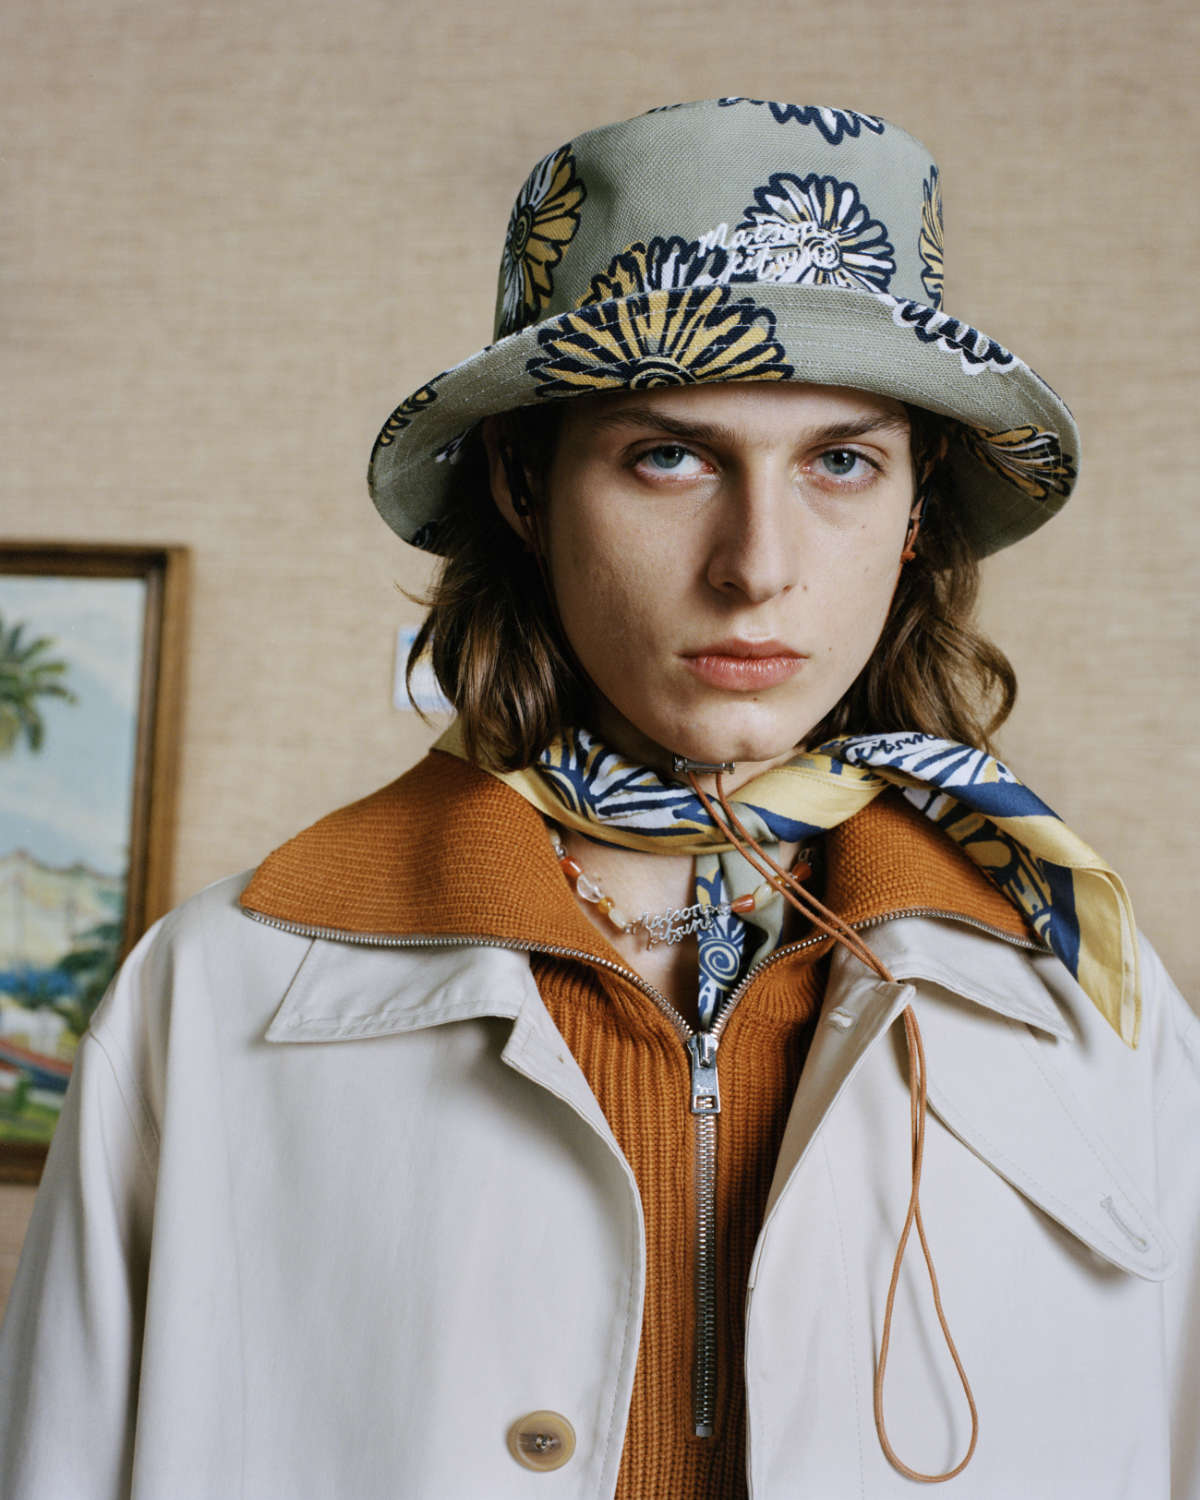 Maison Kitsuné Presents Its New Spring-Summer 2024 Collection: Endless Summer